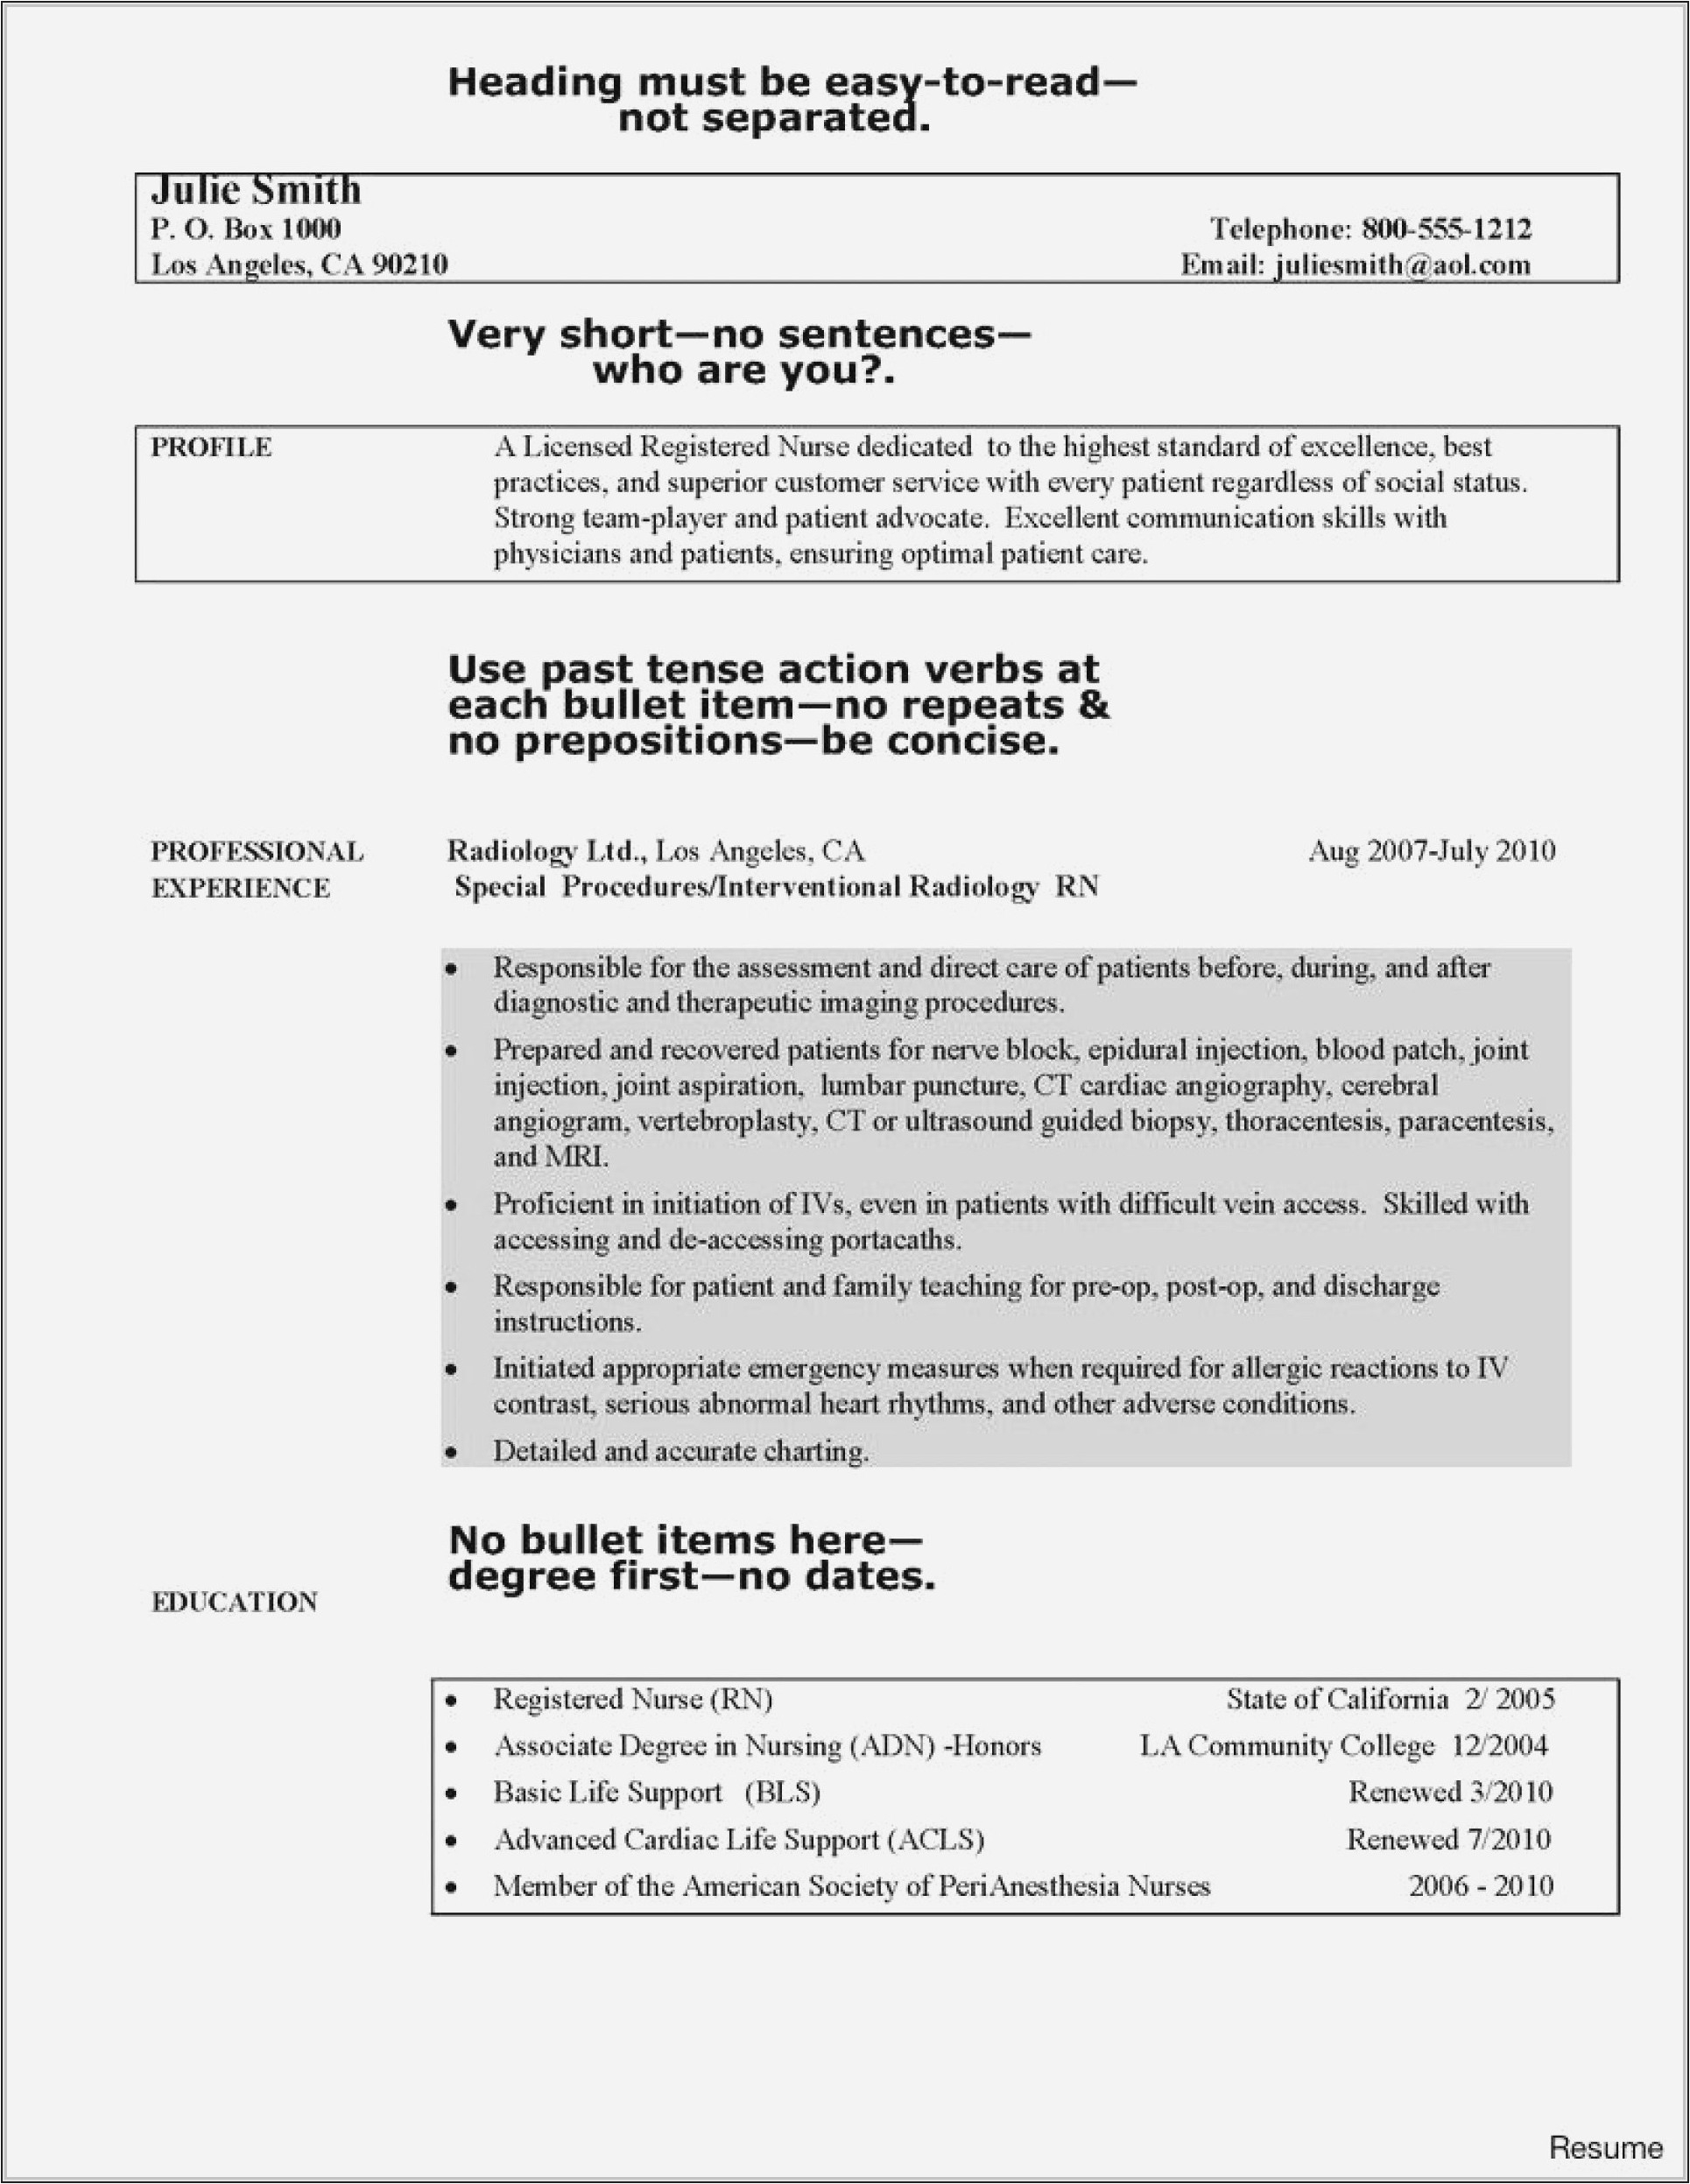 Sample Resume for Cna with No Previous Experience Resume Sample for Cna with No Experience Uncategorized